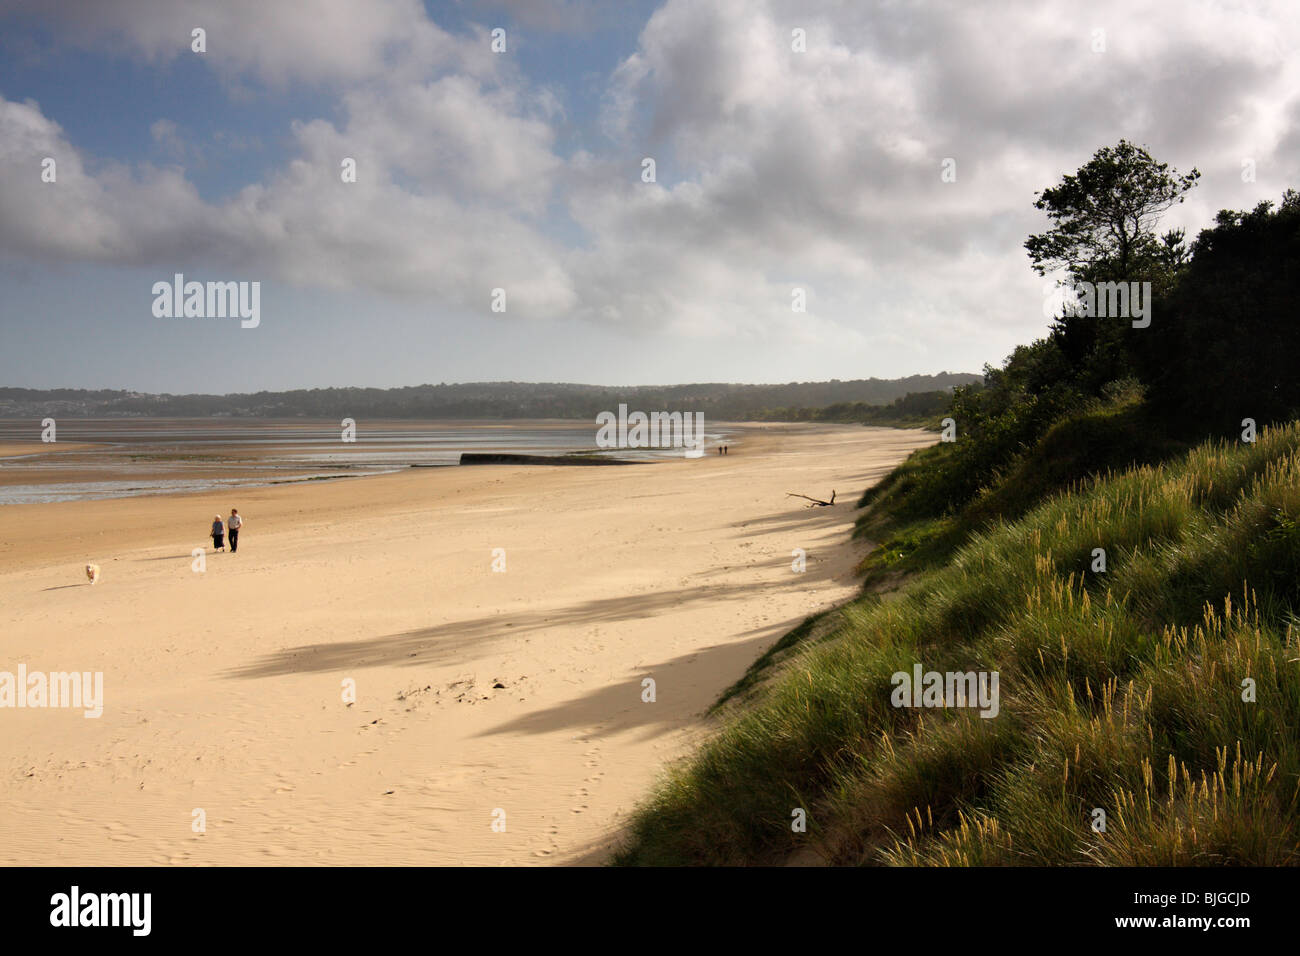 Looking west along Swansea Beach on a summer's day with a blue sky and white clouds, West Glamorgan, south Wales, U.K. Stock Photo